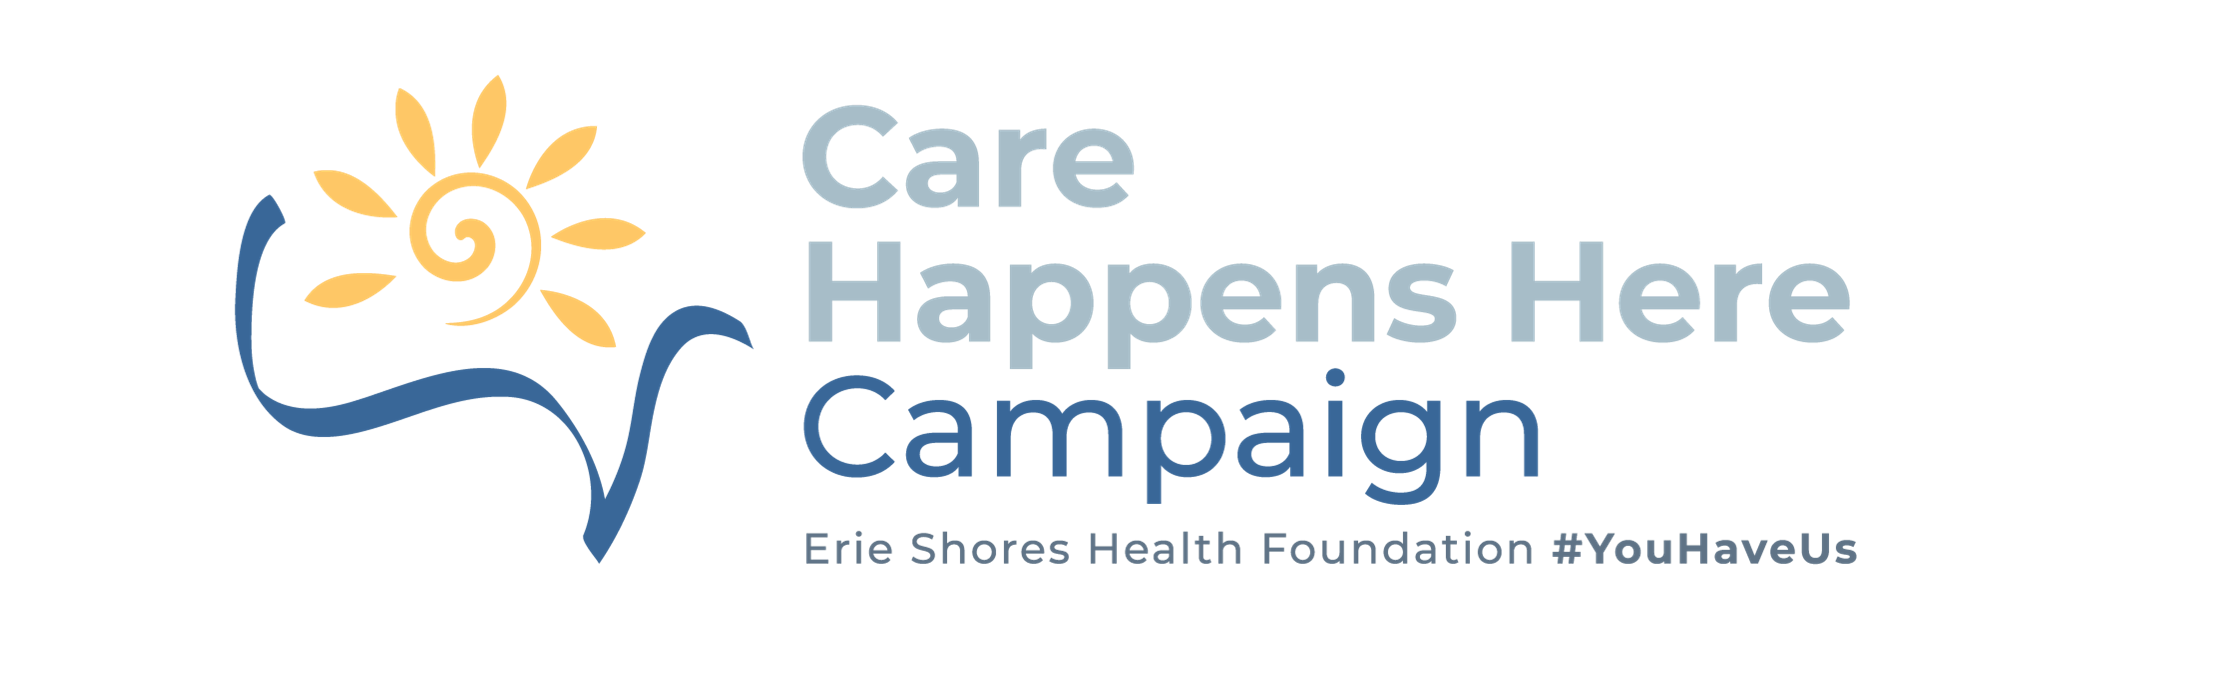 Care happens Here Campaign Logo